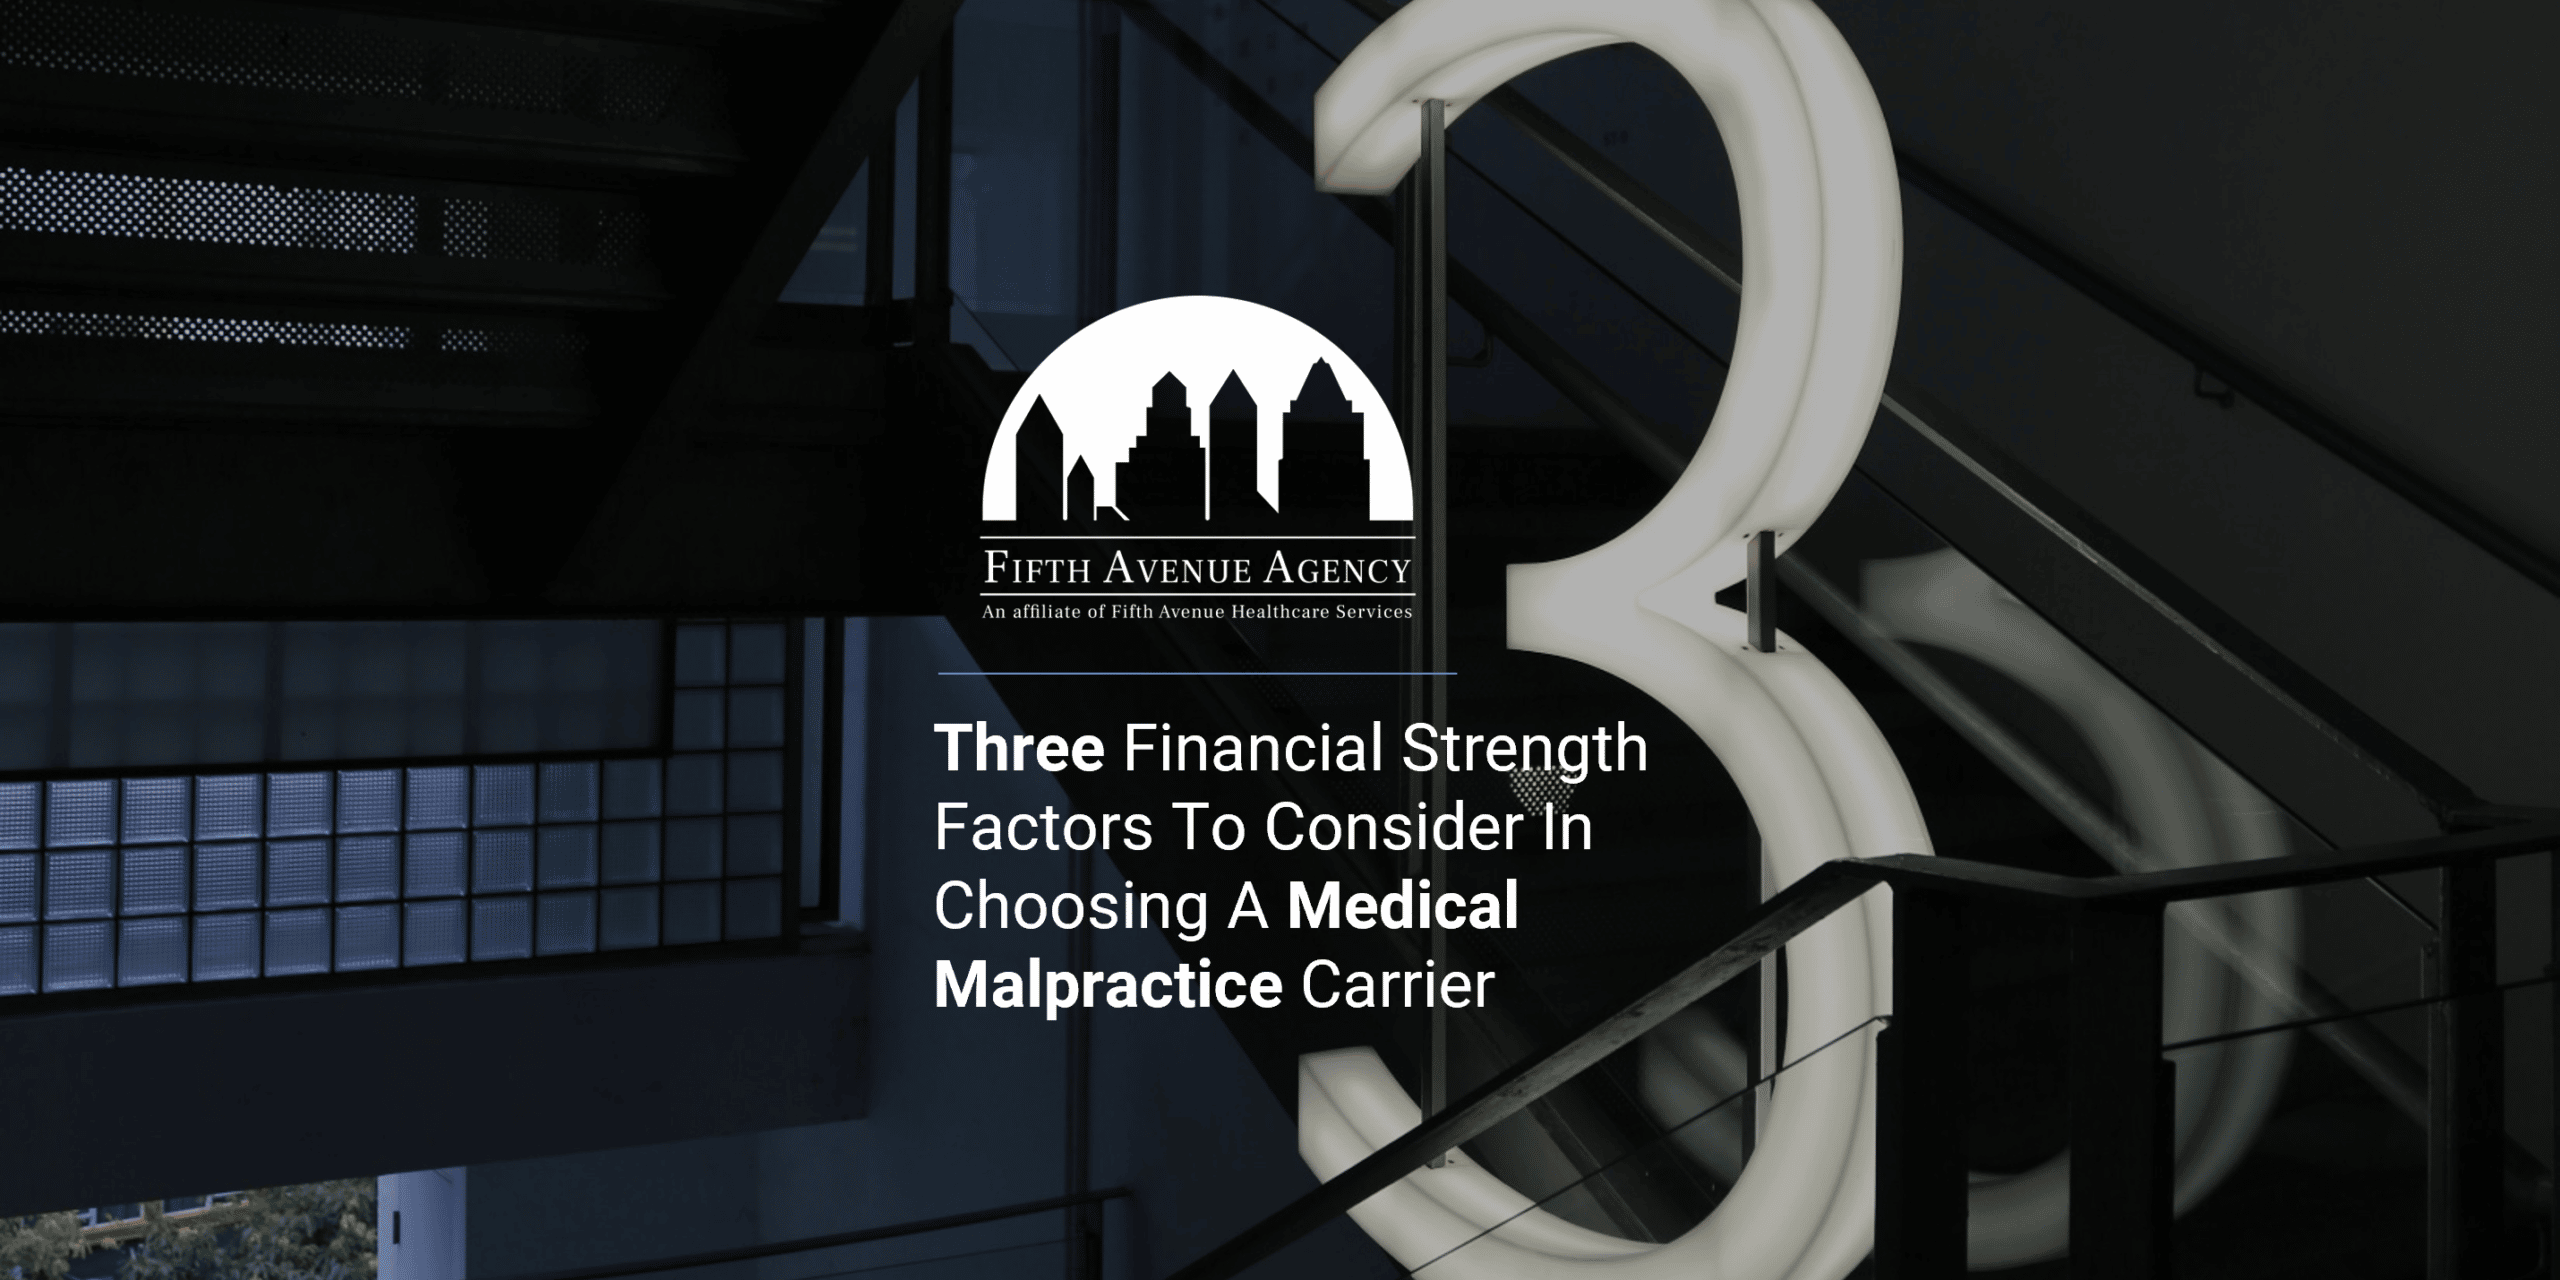 3 Financial Strength Factors Of A Medical Malpractice Carrier Fifthavenueagency.com